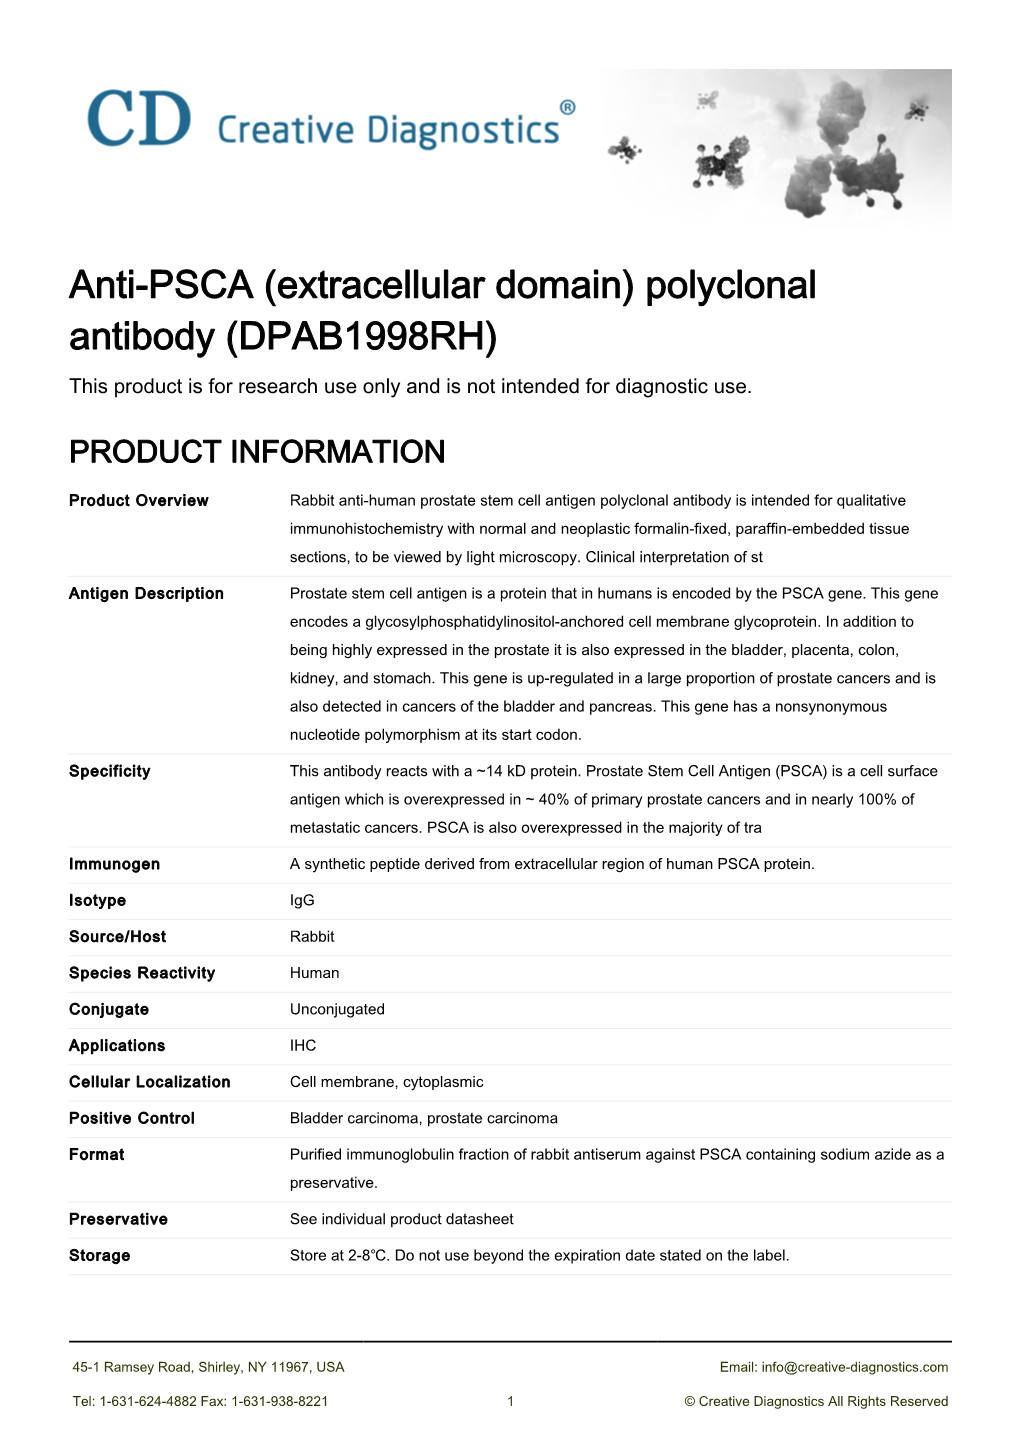 Anti-PSCA (Extracellular Domain) Polyclonal Antibody (DPAB1998RH) This Product Is for Research Use Only and Is Not Intended for Diagnostic Use